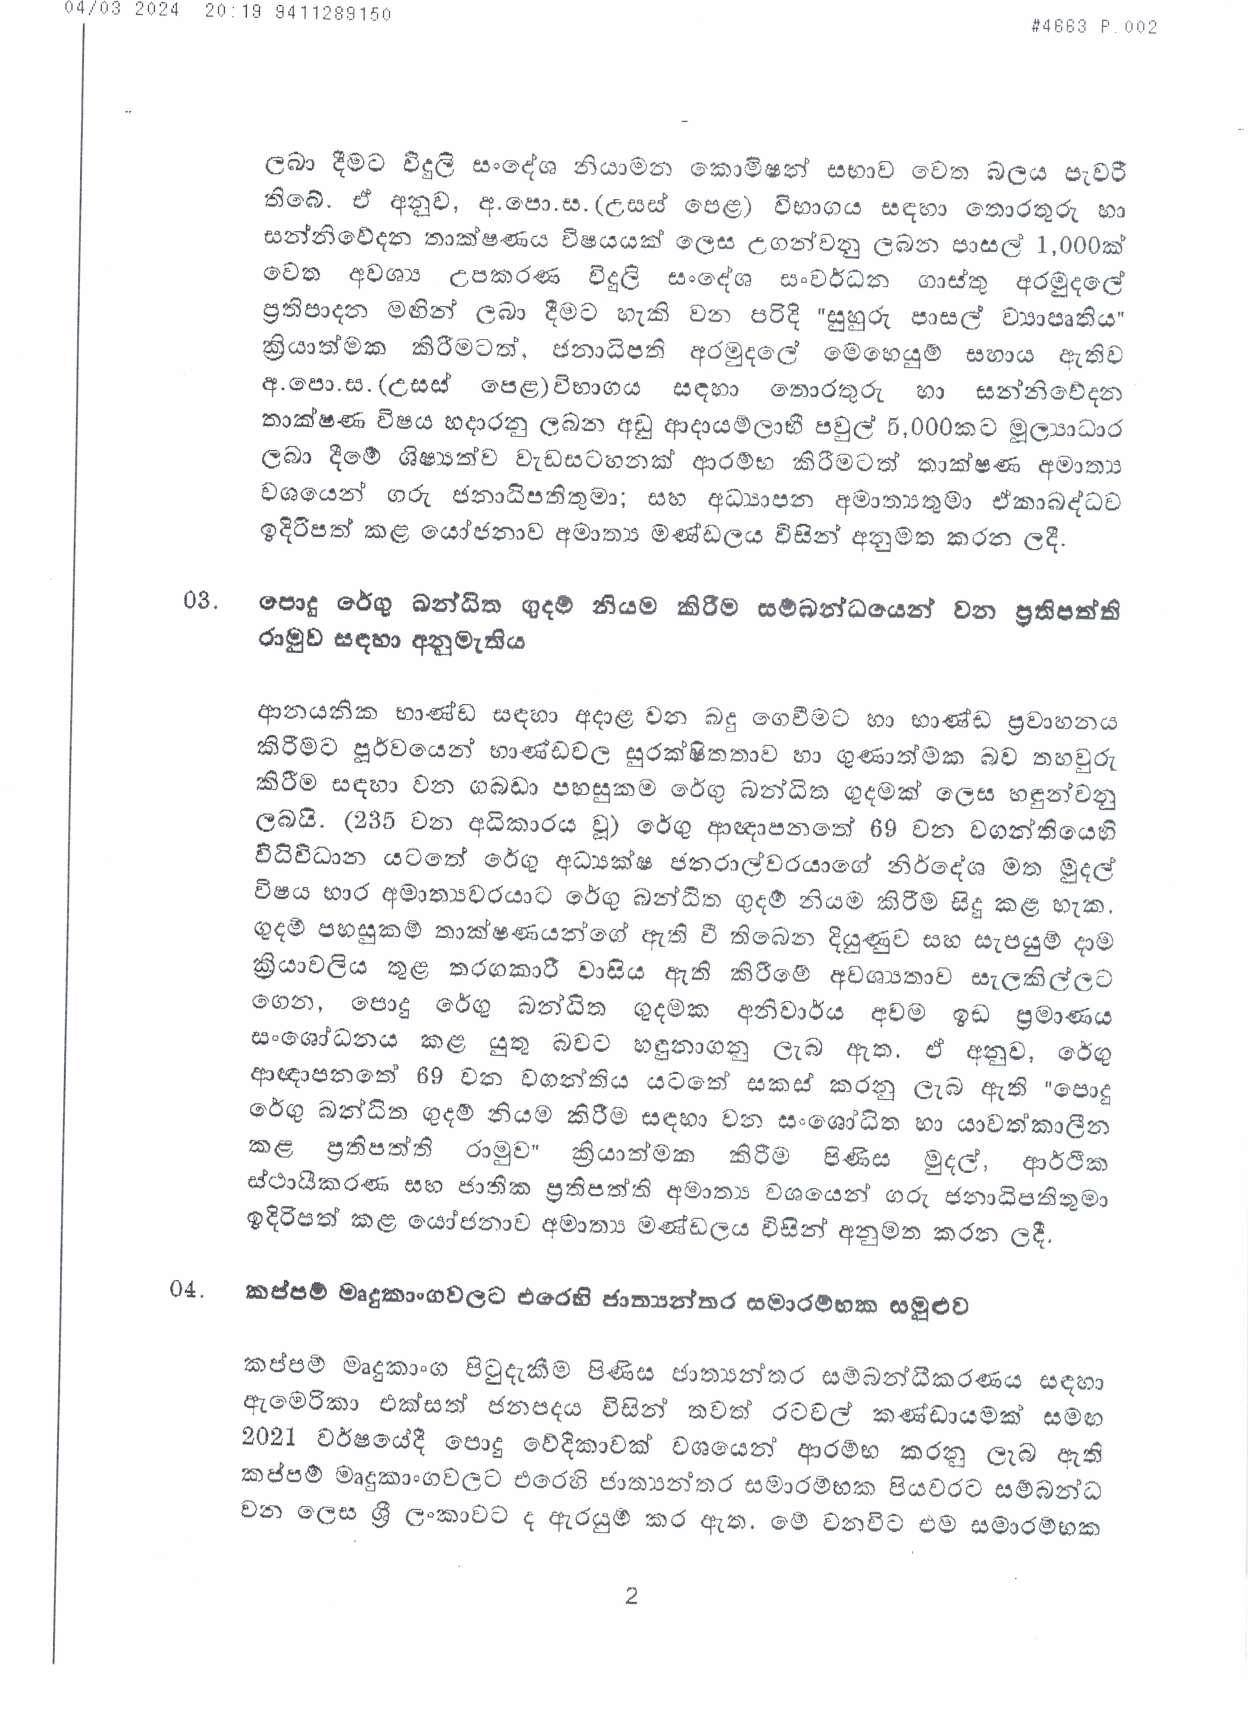 Cabinet Decision on 04.03.2024 page 002